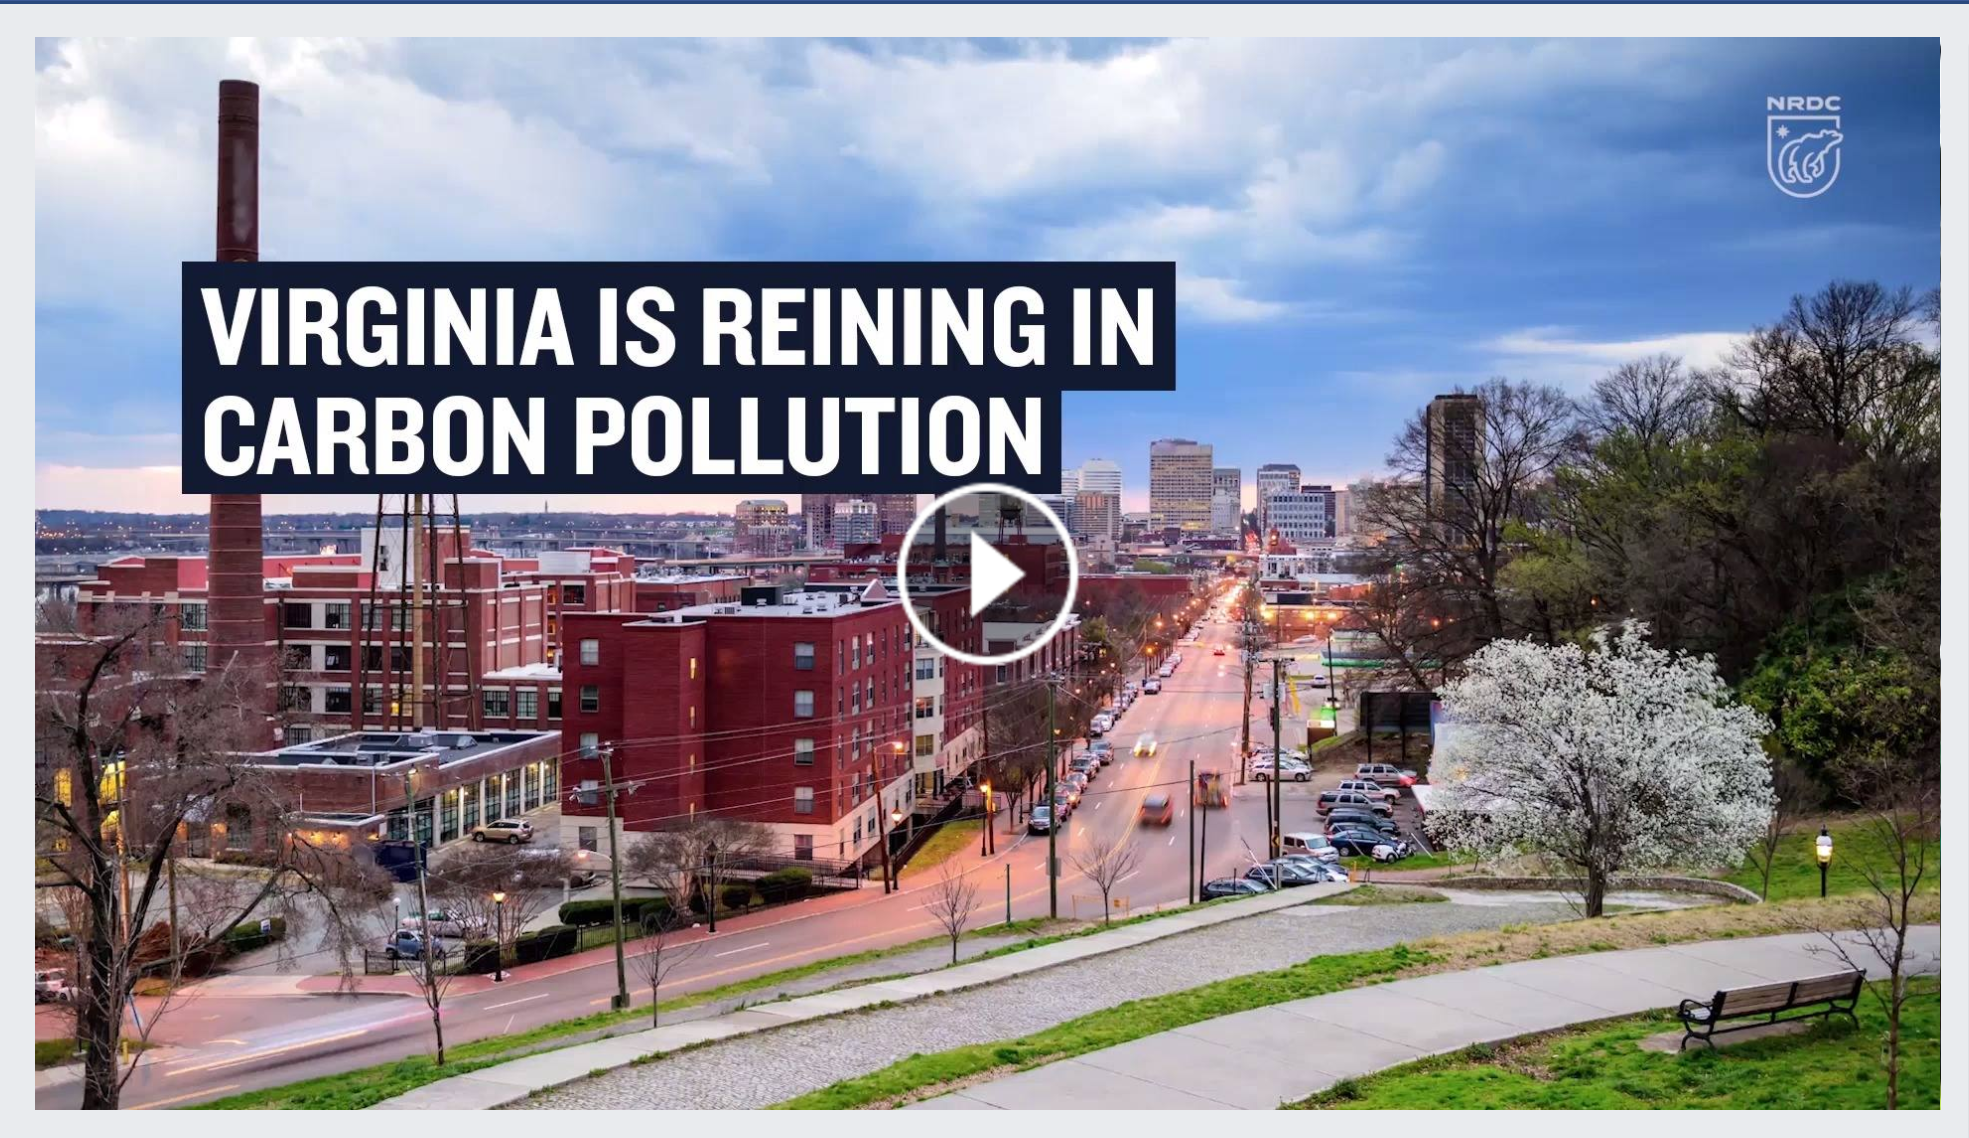 VIDEO: Virginia is Reining in Carbon Pollution